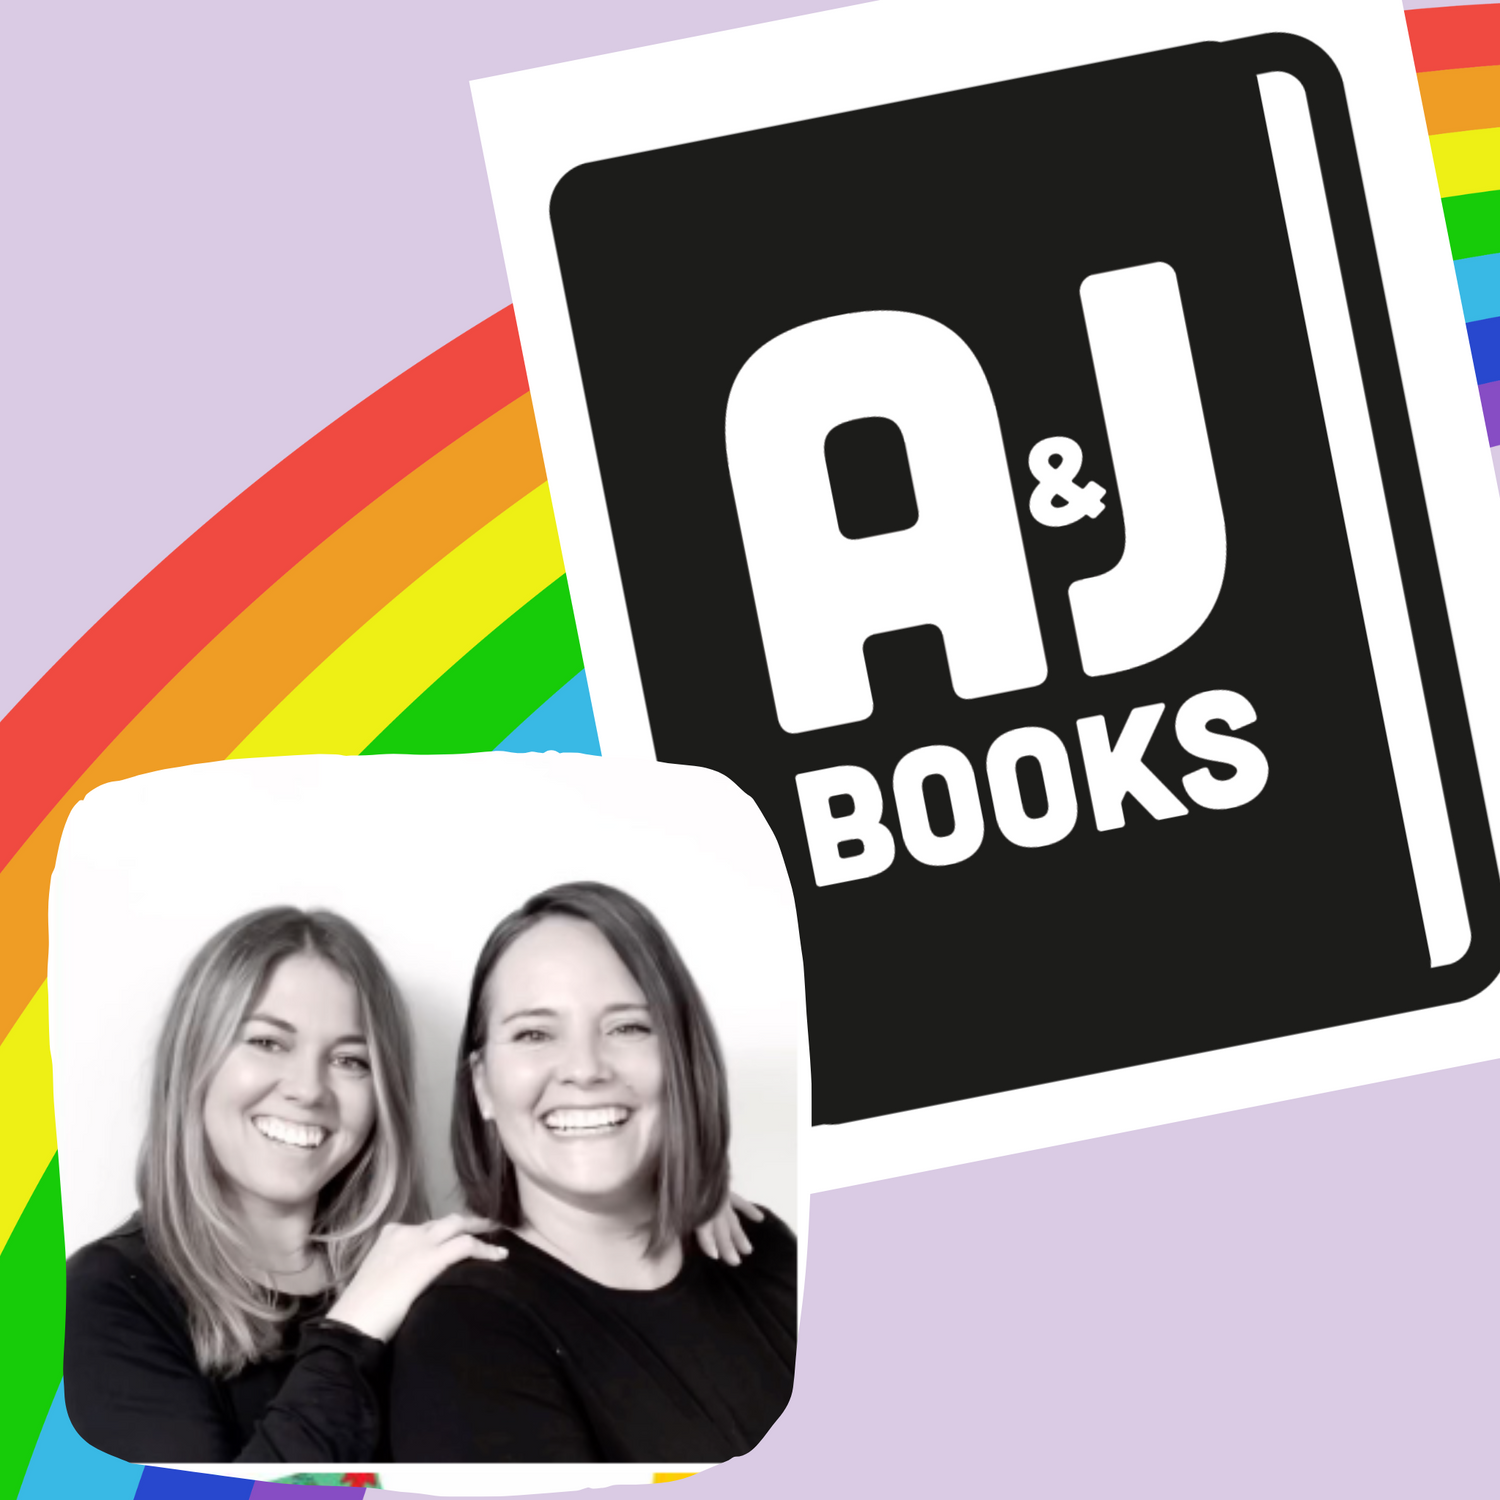 Sister creators of A and J Books, who self publish medium content books through Amazon KDP and Kindle Direct Publishing